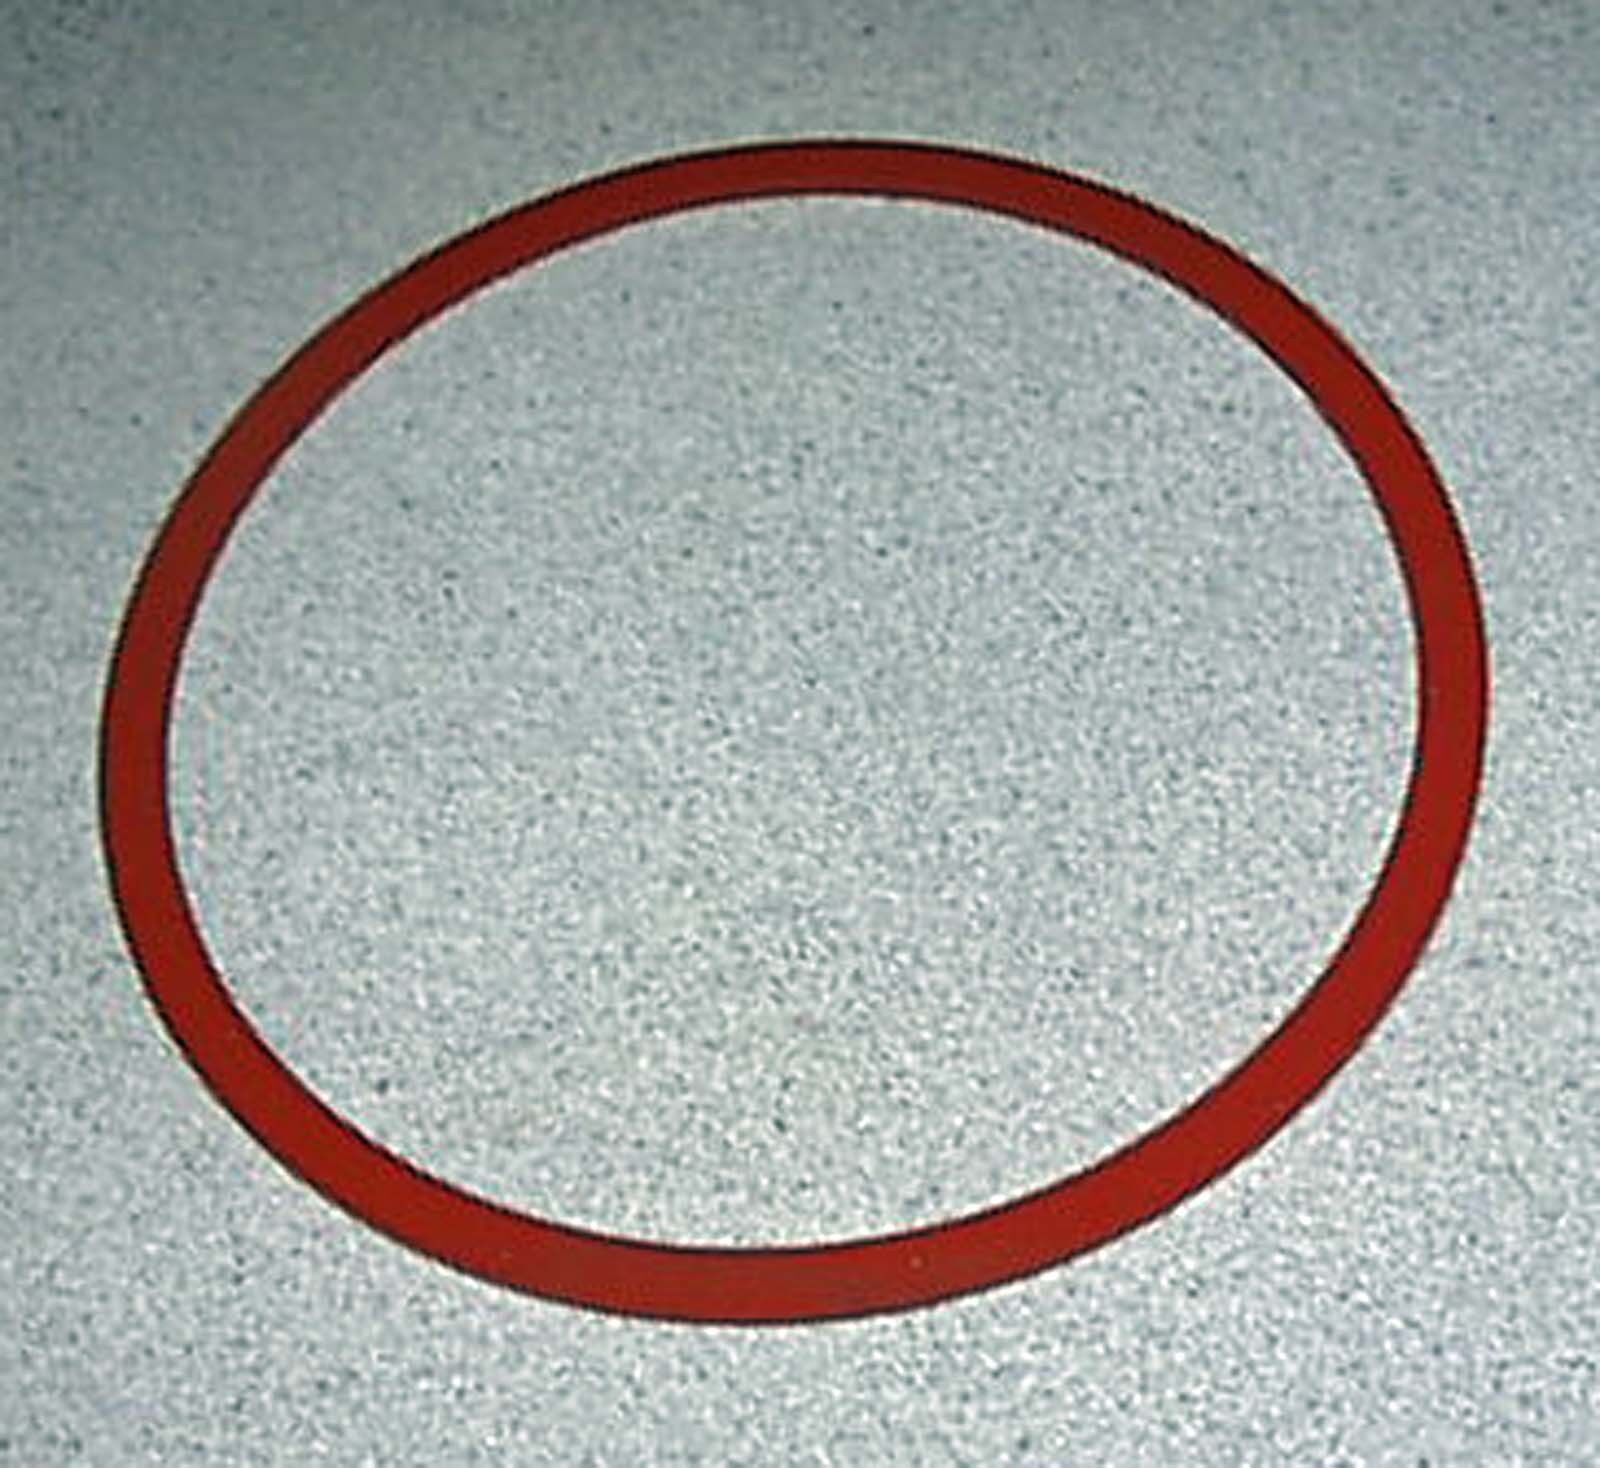 NEW REPLACEMENT GASKET SEAL Wear-Ever Chicken Bucket Cooker 6 Qt & MOST 4 Qt